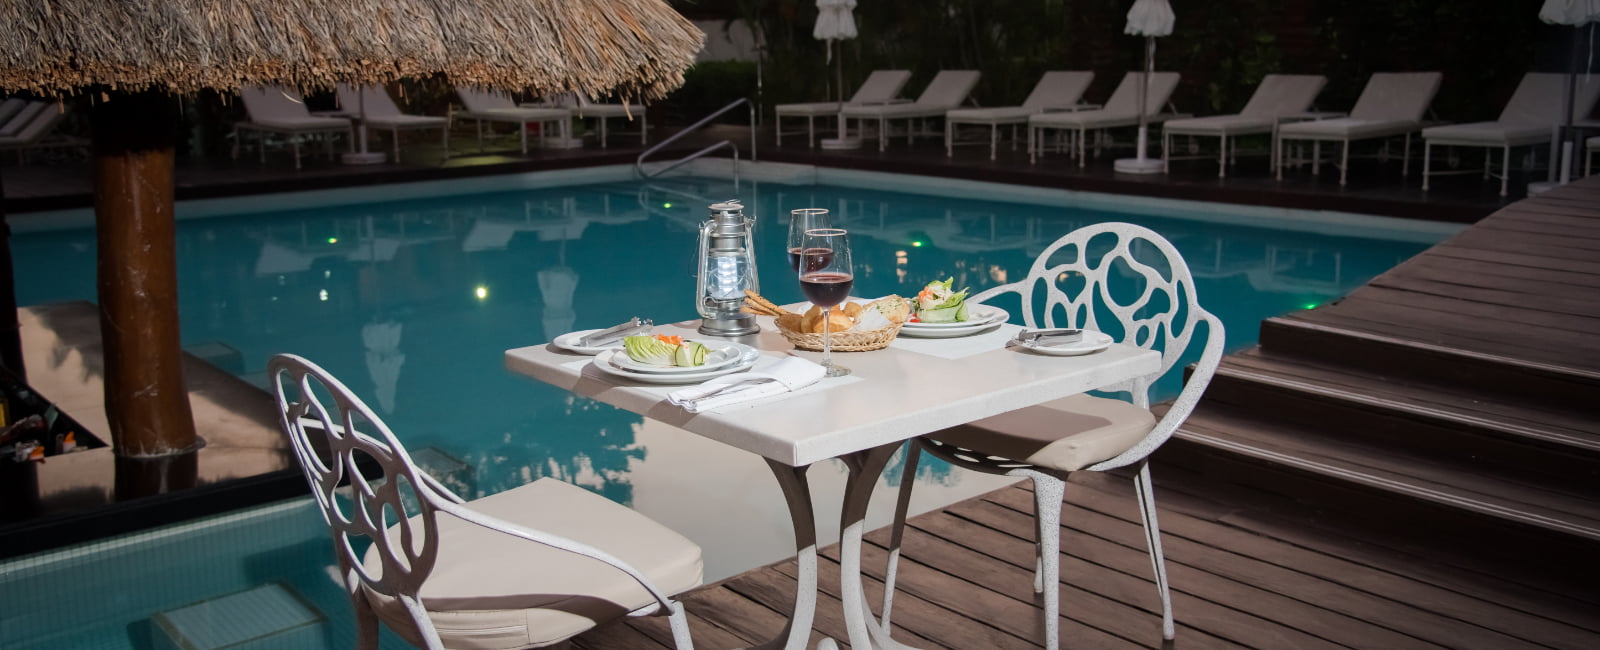 Table with service, food and wine for two at the swimming pool